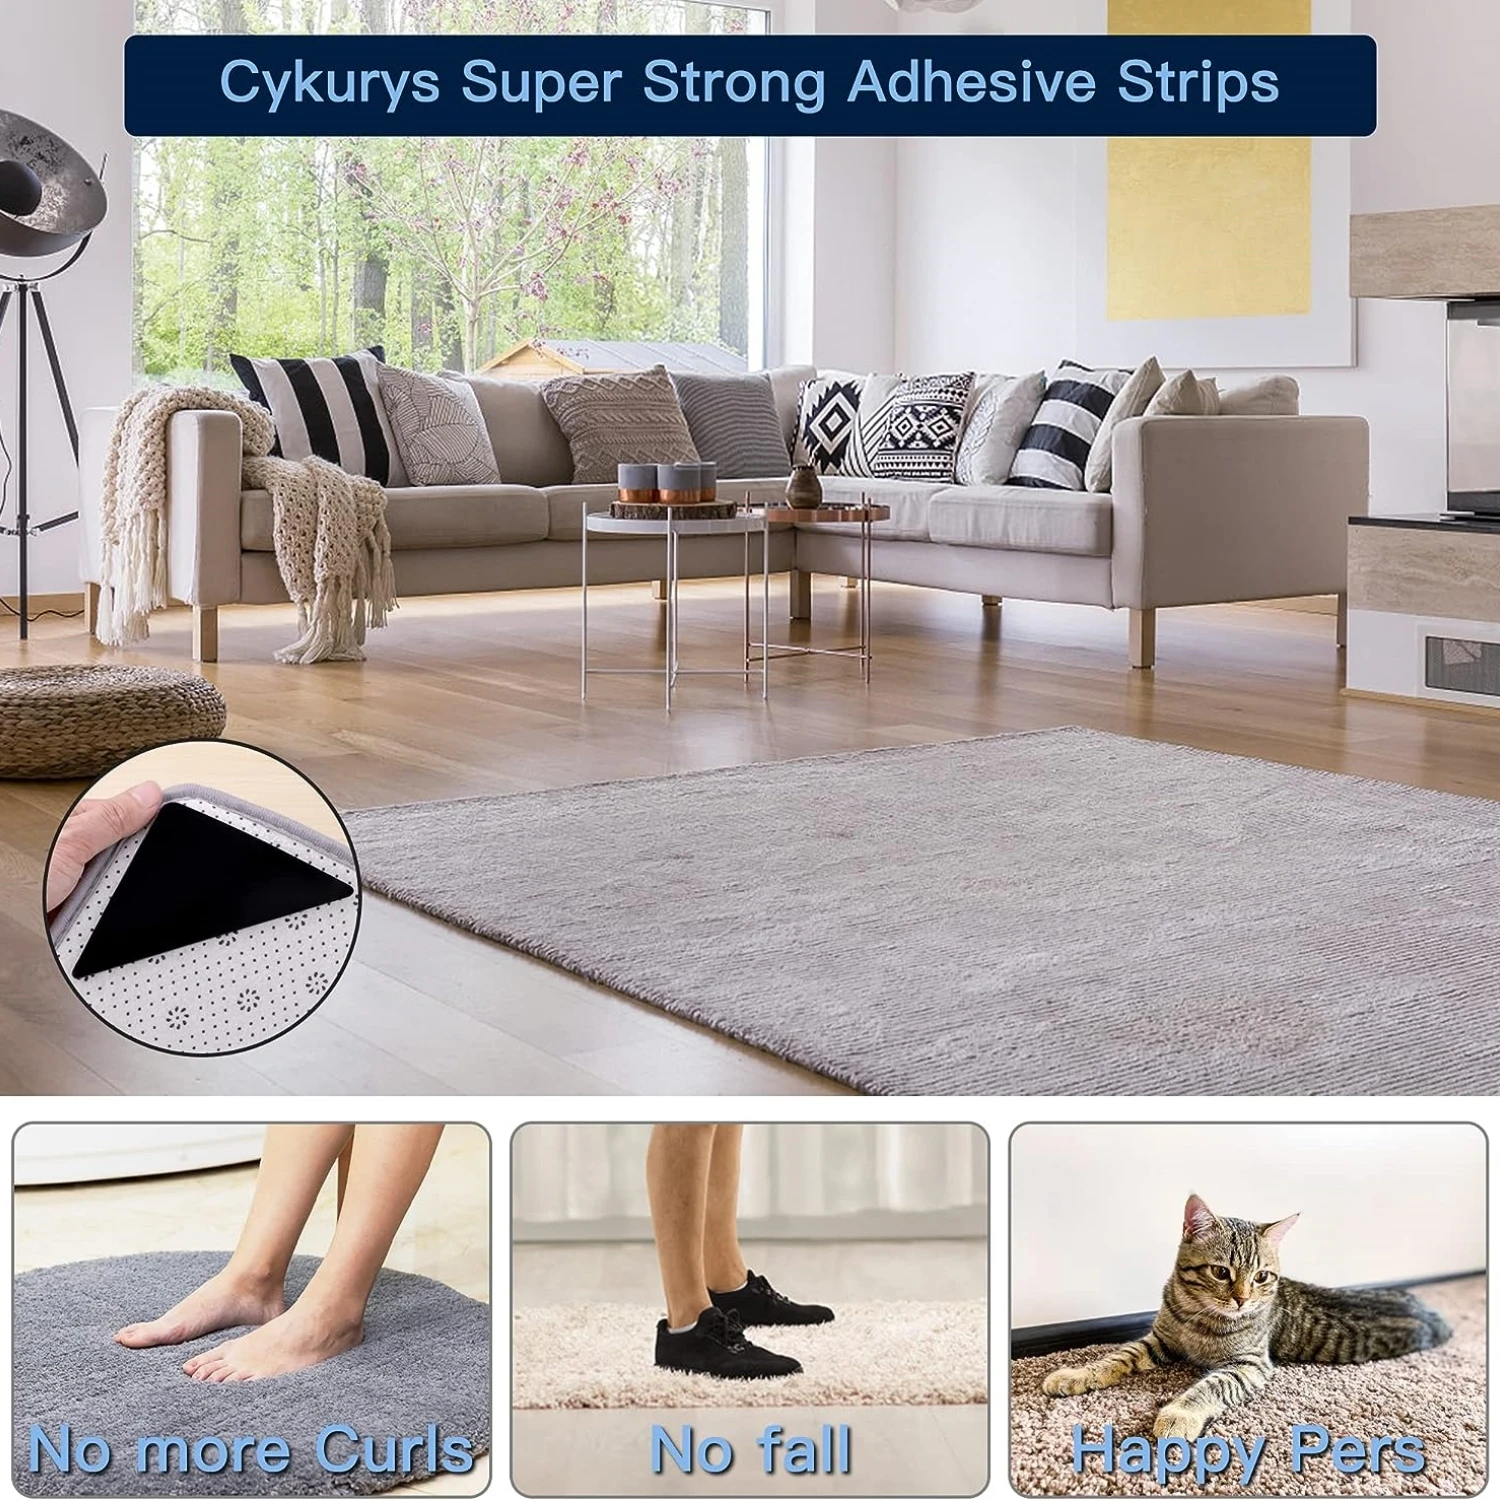 https://ae01.alicdn.com/kf/Sf31a596cd20146cfbad7ba96467a8a19G/8Pcs-Rug-Grippers-Non-Slip-Rug-Pads-Reusable-and-Washable-Rug-Gripper-for-Area-Rugs-Carpet.jpg